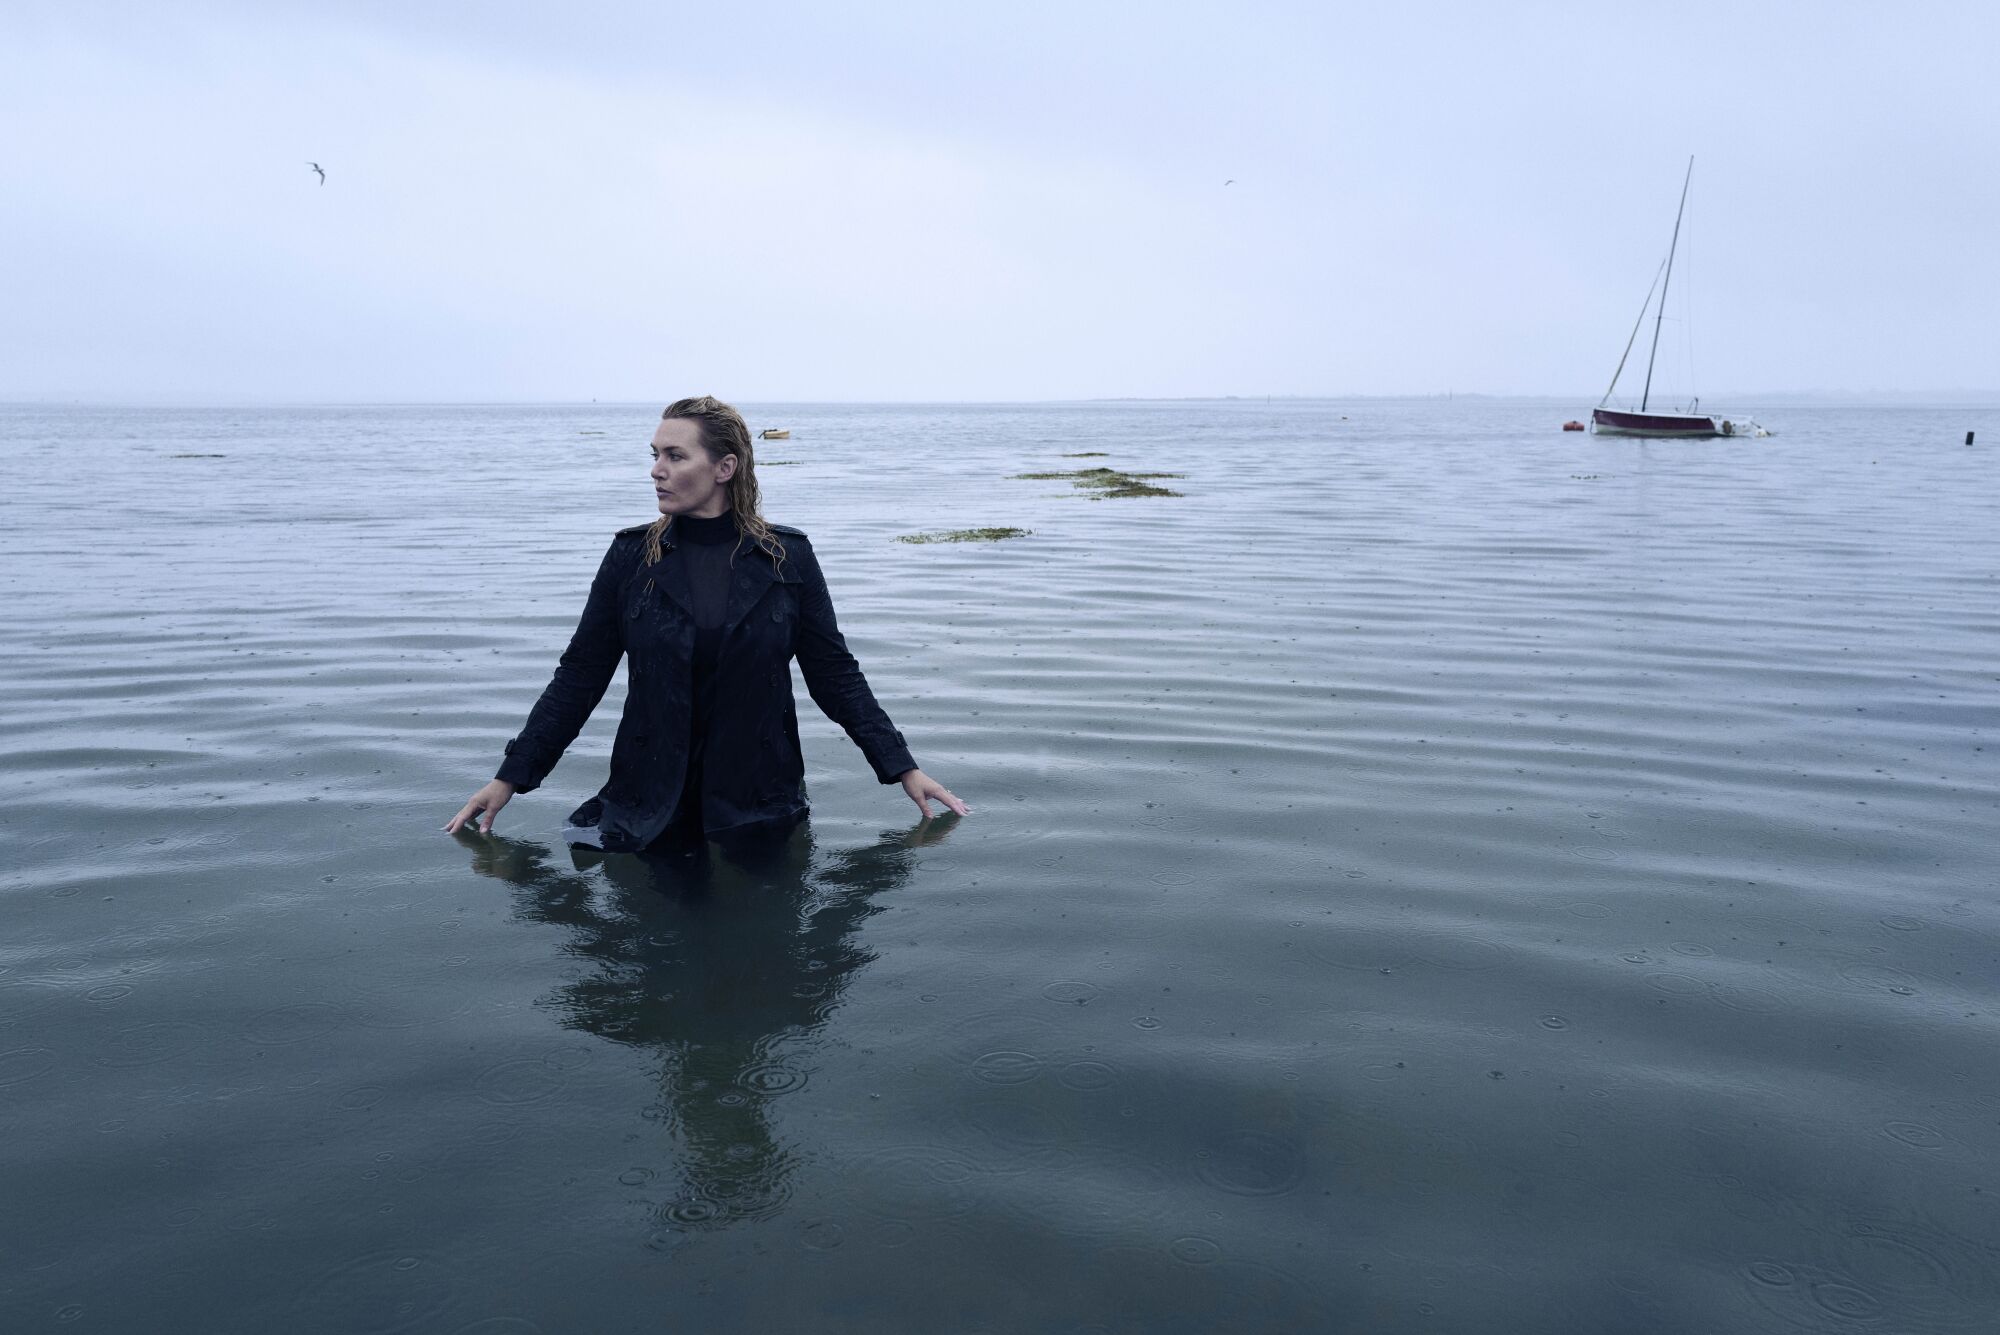 Actress Kate Winslet wading in a body of water on a gray day